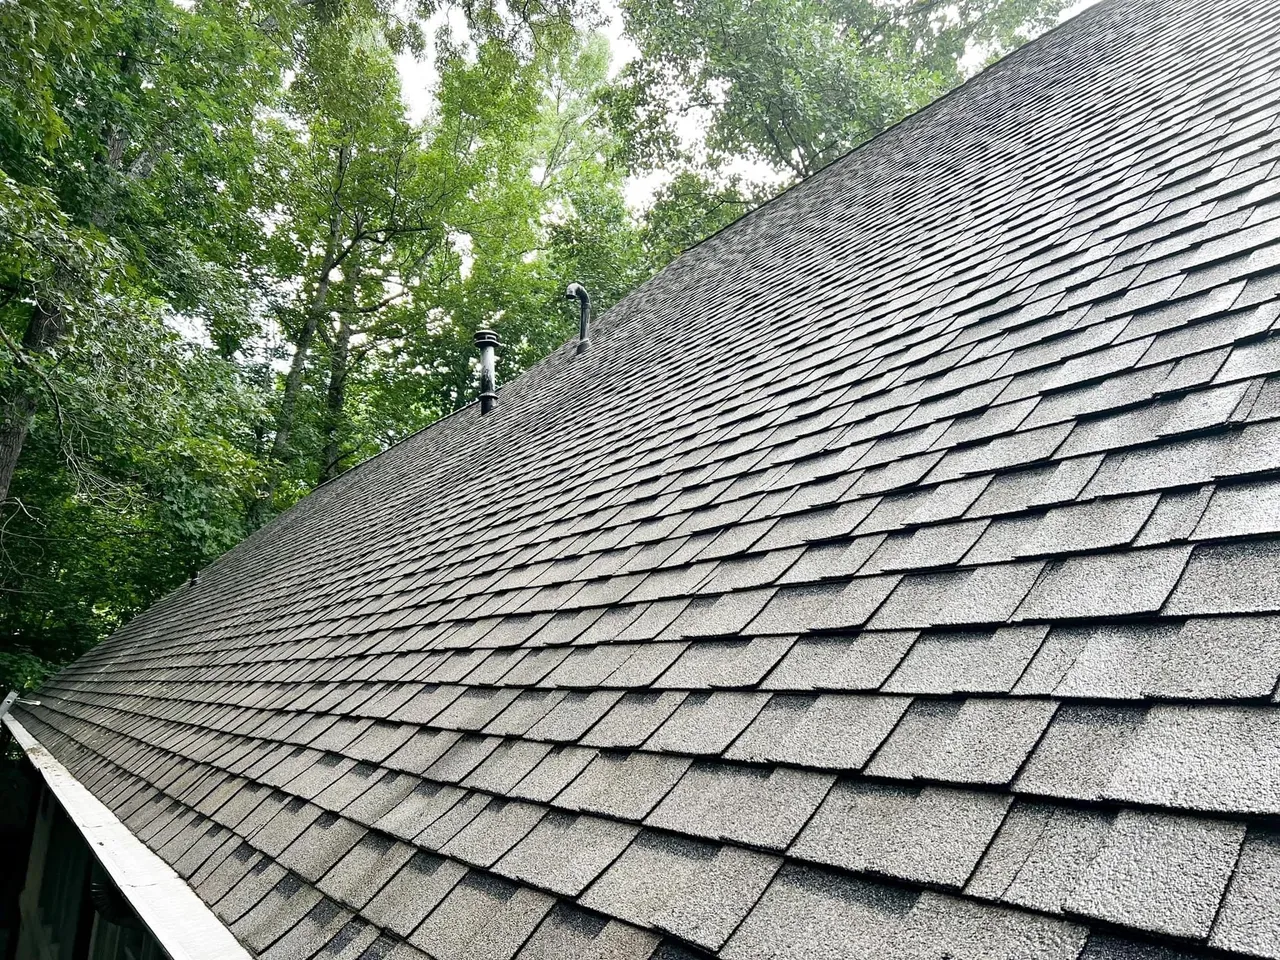  image of Roof Tile Washing Knoxville | pure clean knoxville 